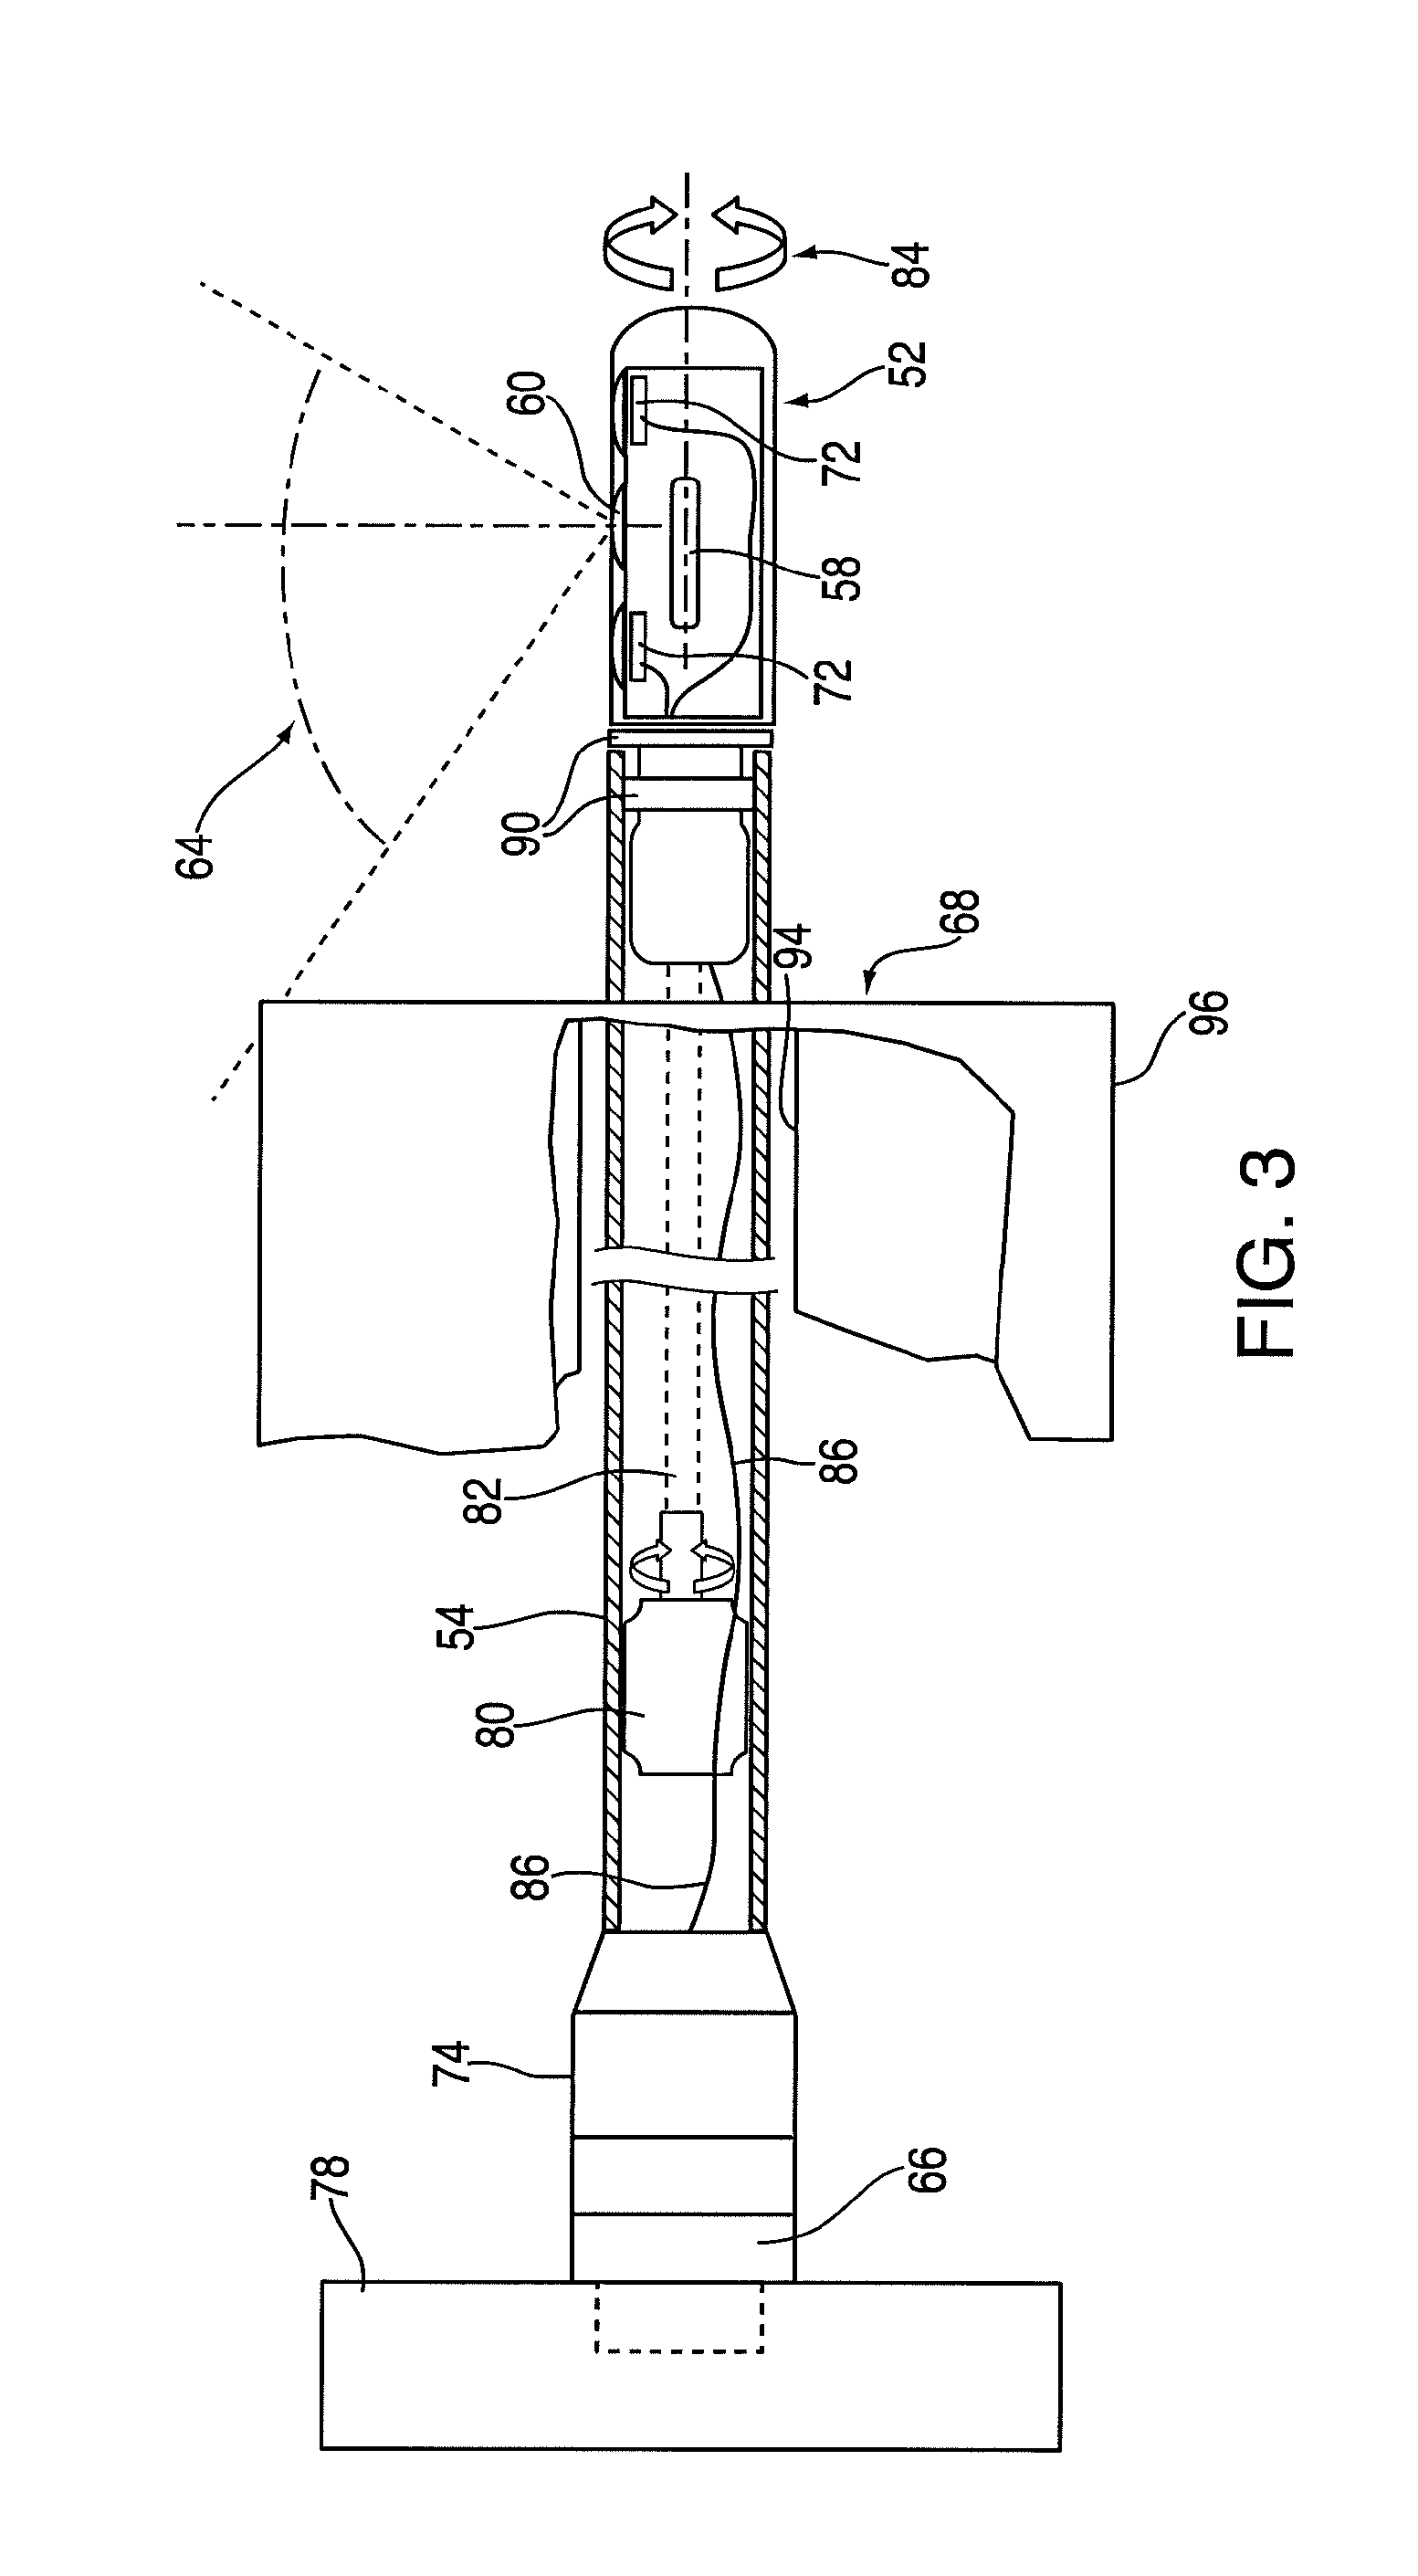 Method and endoscopic device for examining or imaging an interior surface of a corporeal cavity